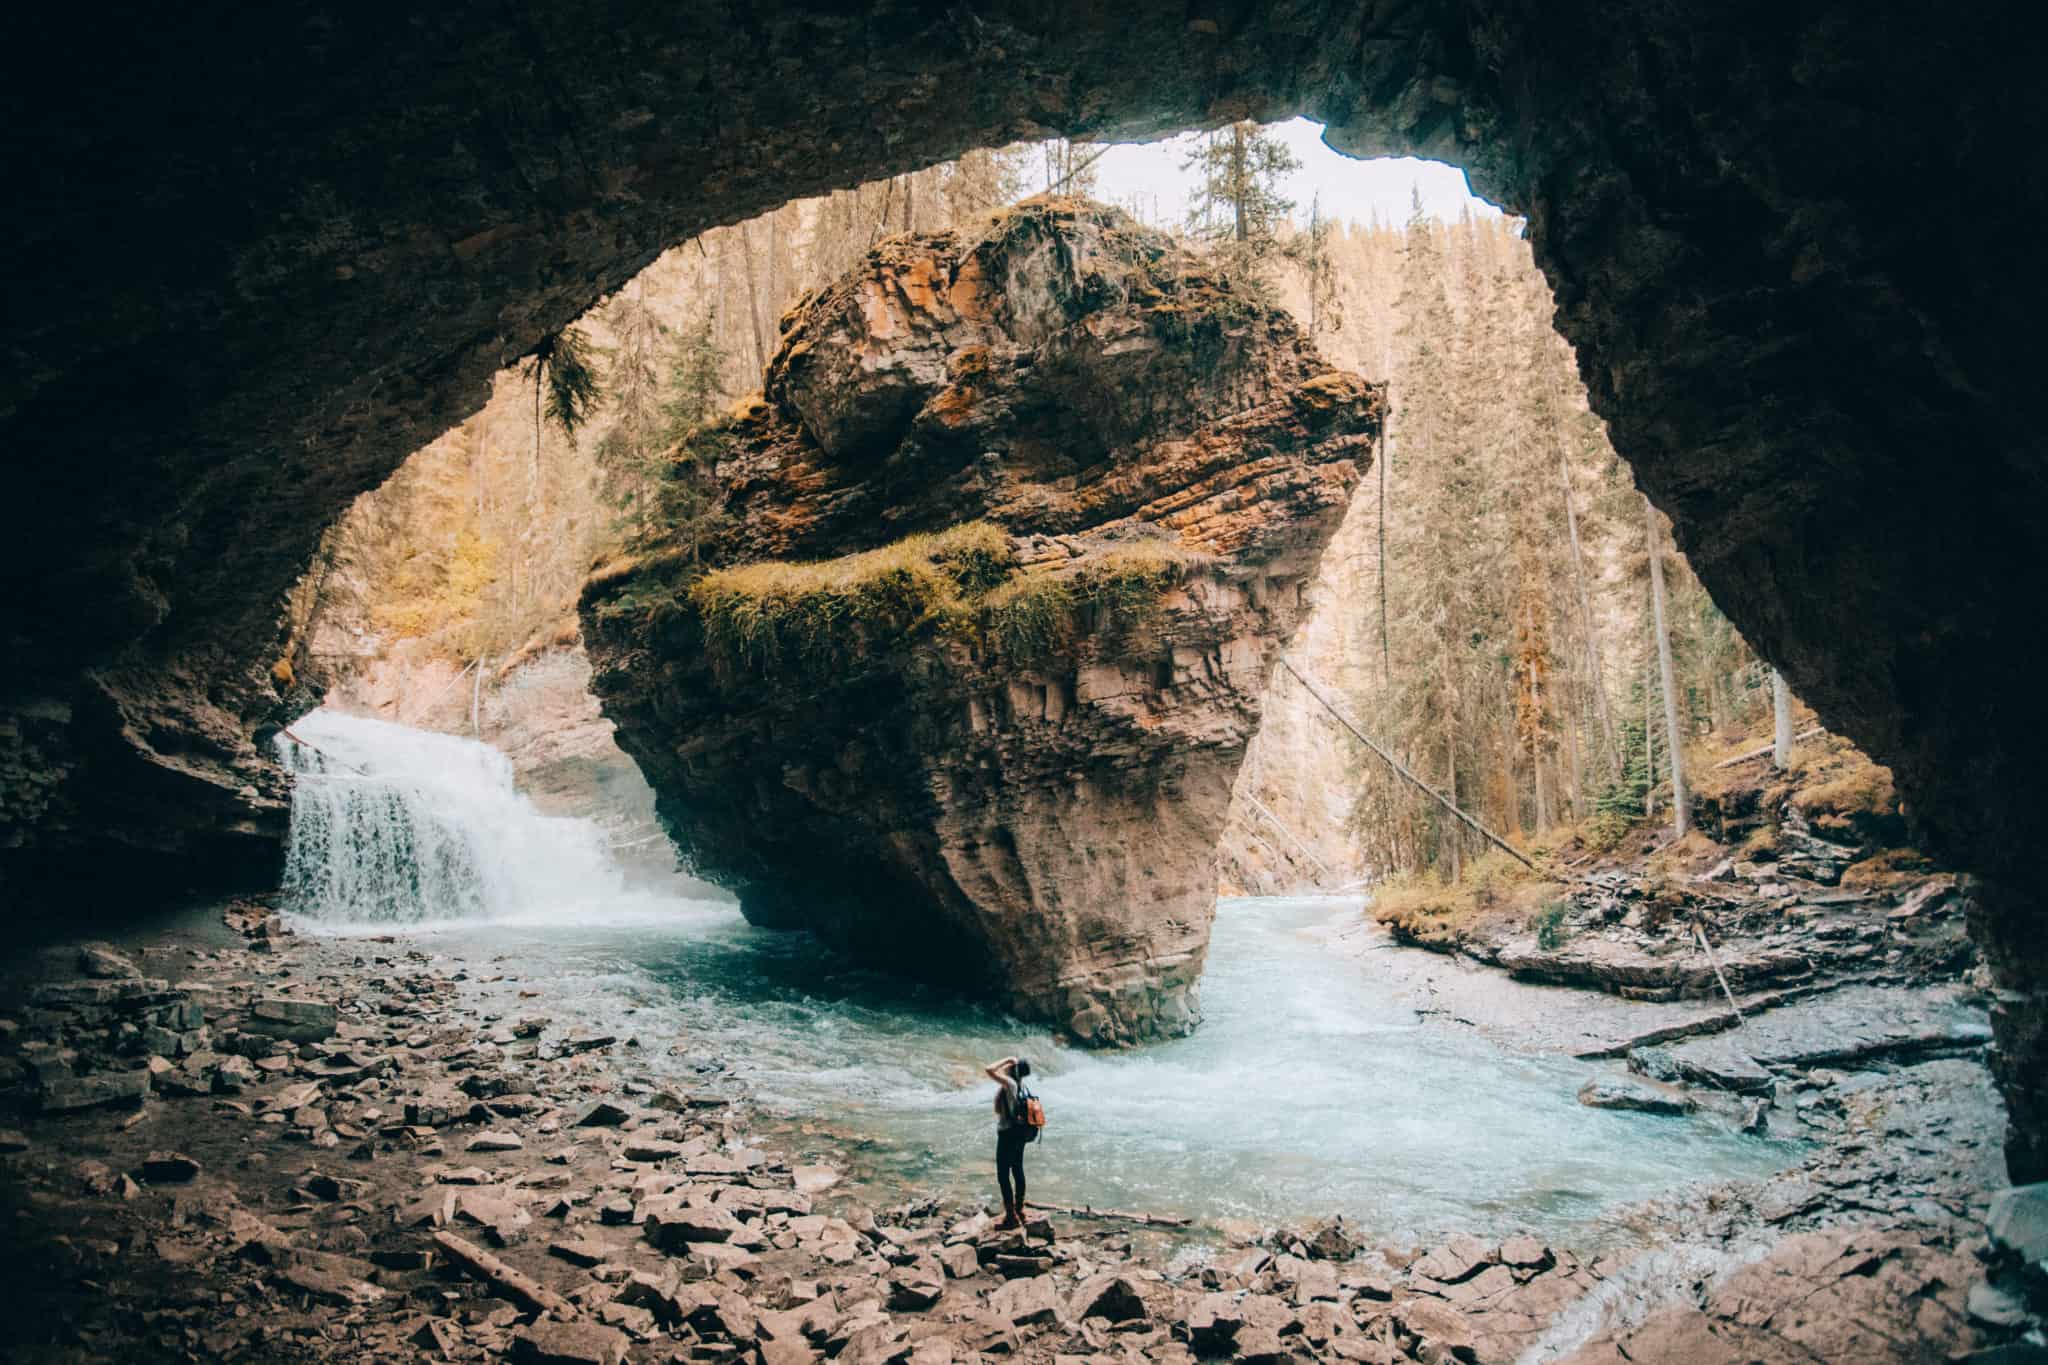 Things to do in Banff - Johnston Canyon